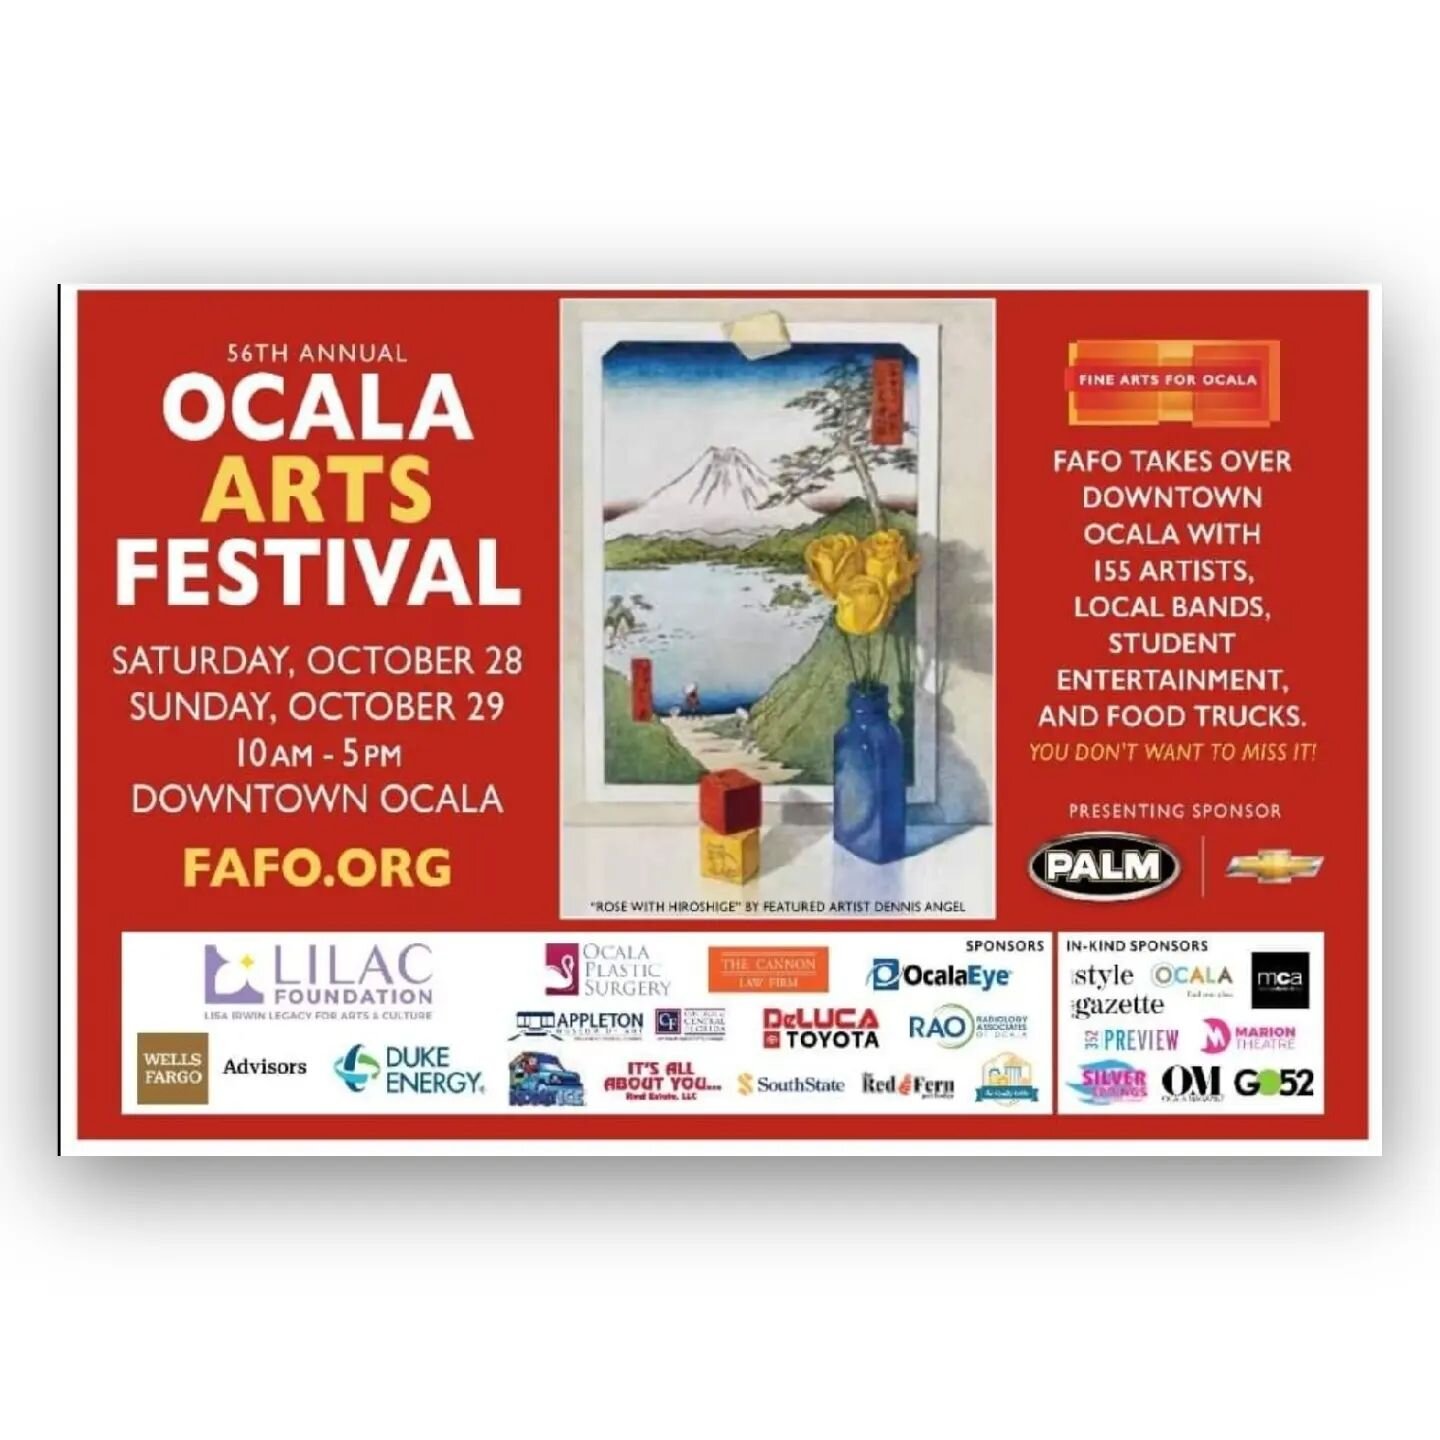 Join us this weekend! My booth is #43! (I'm in front of the Hilton) 🤙

I'm super excited for this weekend's Ocala Arts Festival hosted by @fafoocala. Looks like it'll be great weather! I'll have lots of brand new work and prints available! Even if y